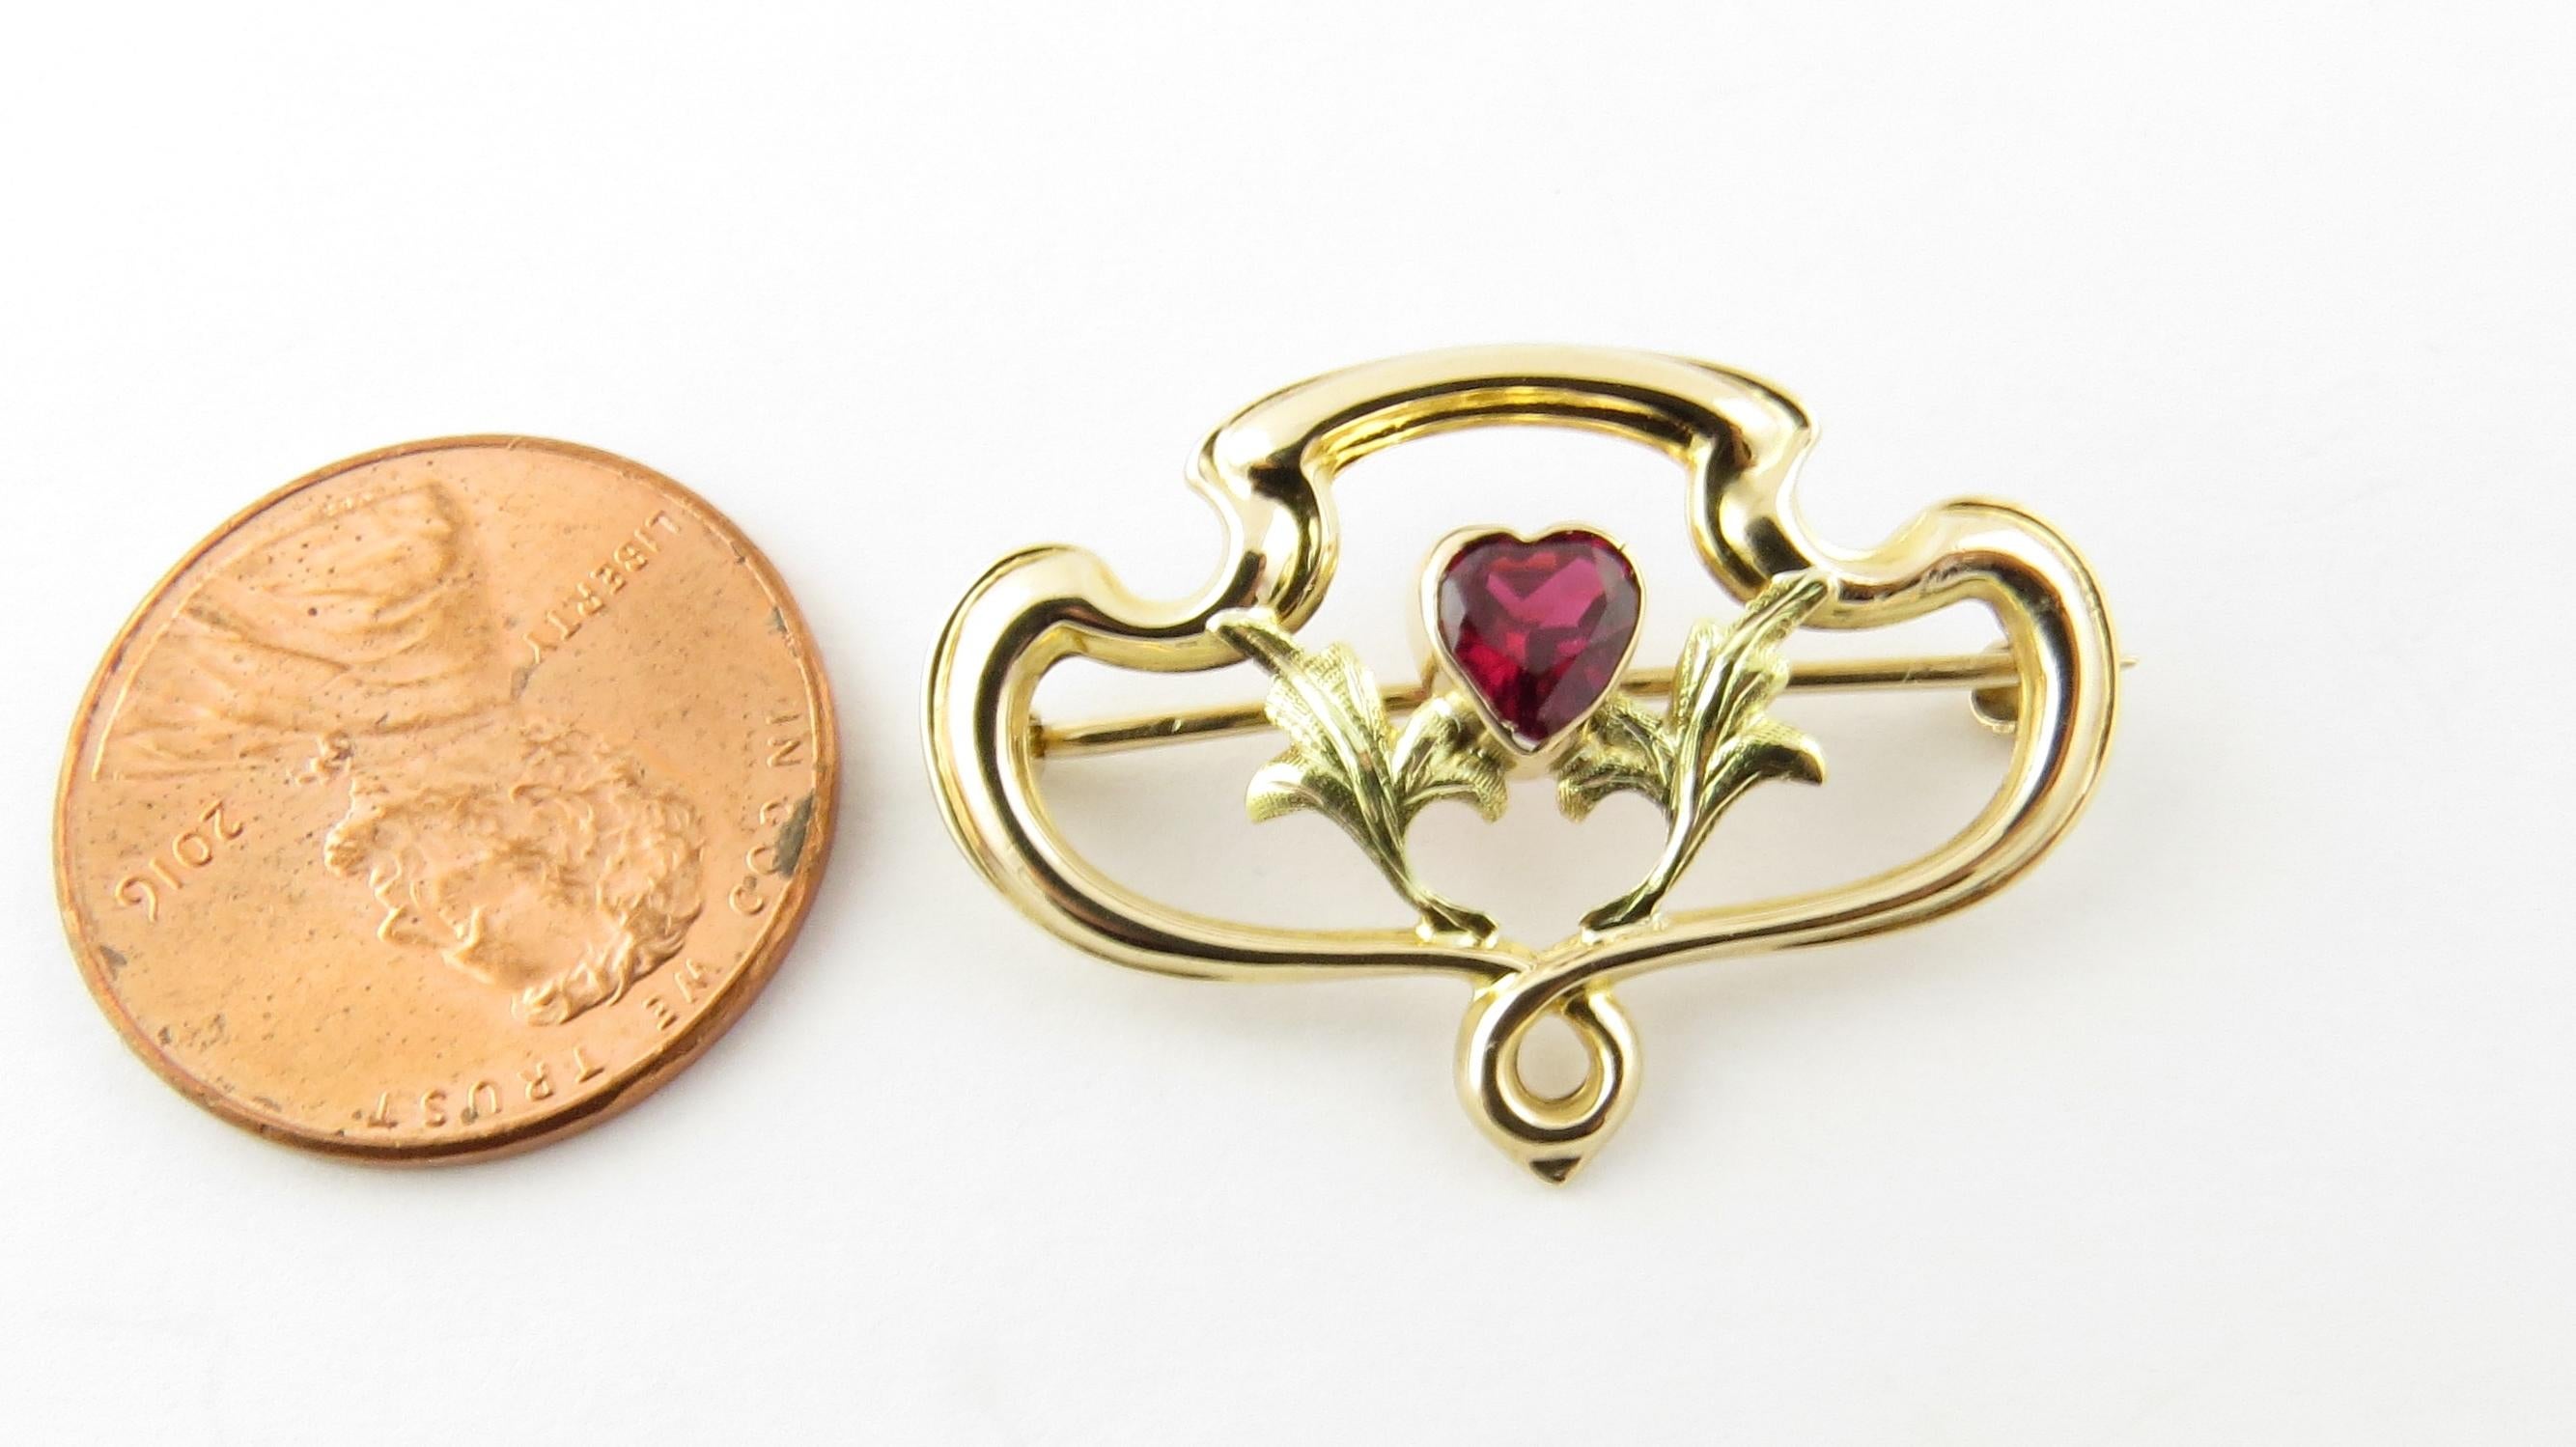 Vintage 10 Karat Yellow Gold and Synthetic Ruby Brooch/Pin

This lovely brooch features one heart shaped synthetic ruby (6 mm x 5 mm) set in beautifully detailed 10K yellow gold.

Size: 20 mm x 30 mm

Weight: 1.0 dwt. / 1.6 gr. Stamped: 10K

Very